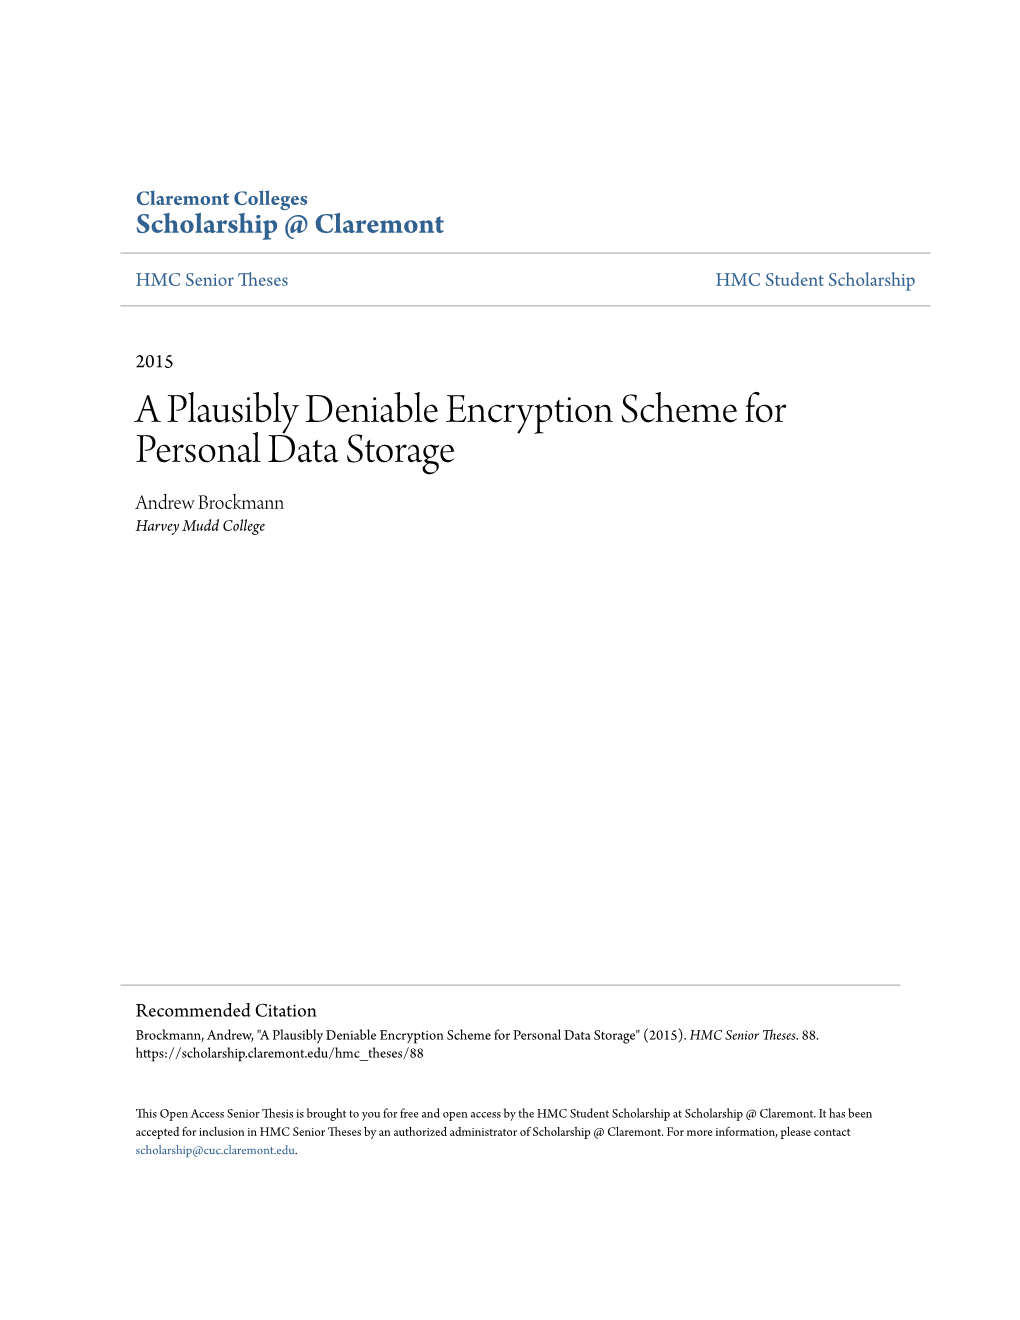 A Plausibly Deniable Encryption Scheme for Personal Data Storage Andrew Brockmann Harvey Mudd College